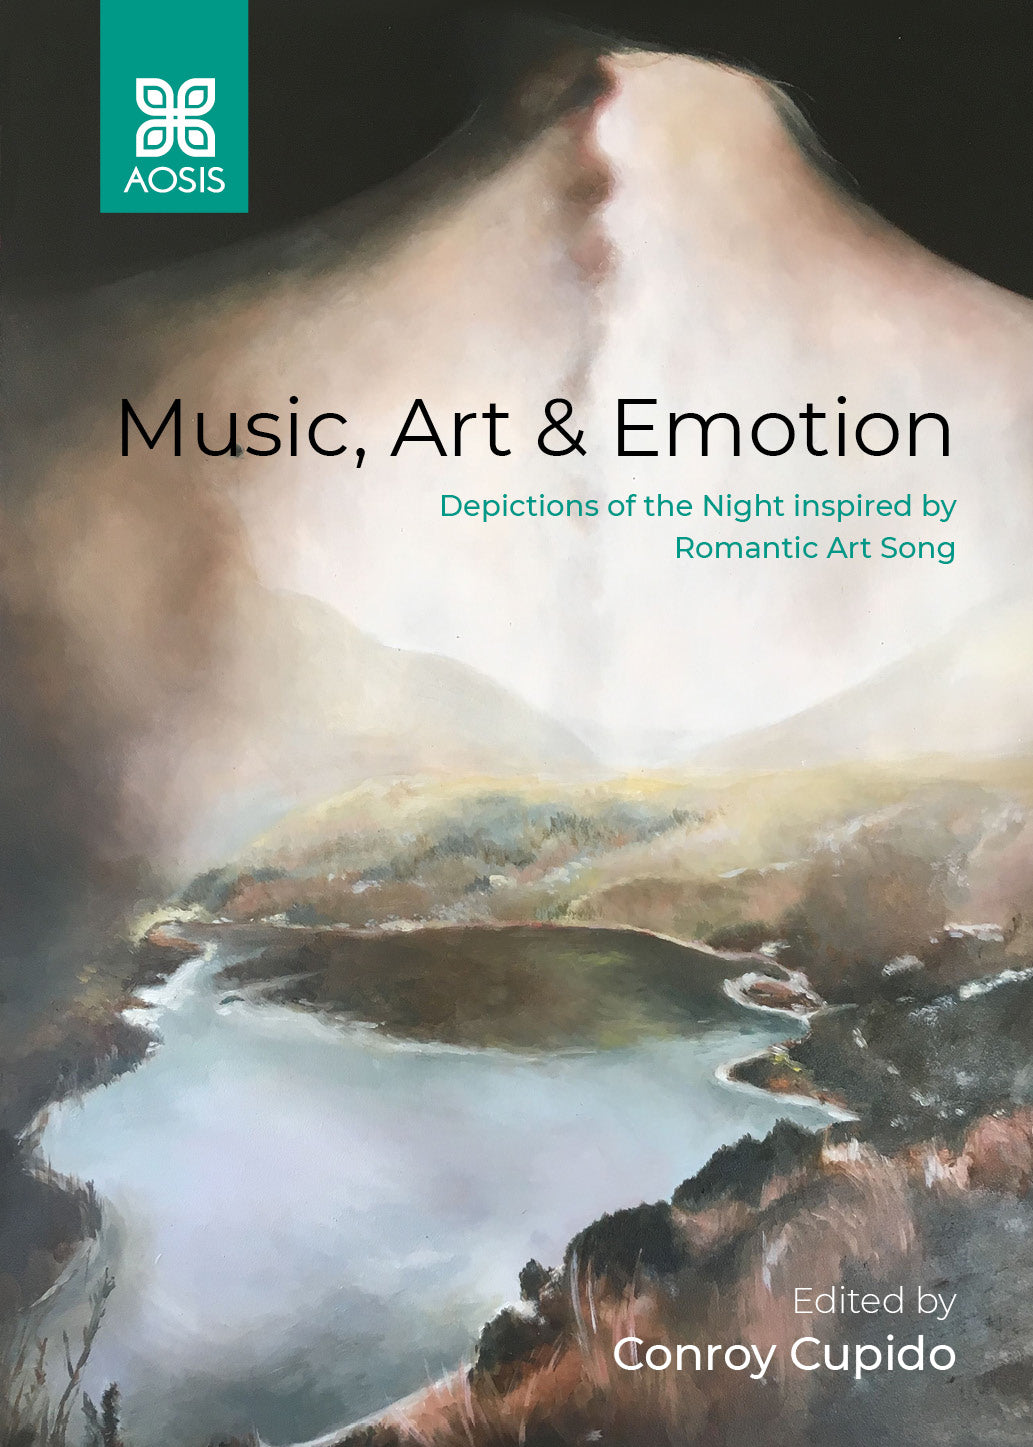 Music, Art & Emotion: Depictions of the Night inspired by Romantic Art Song